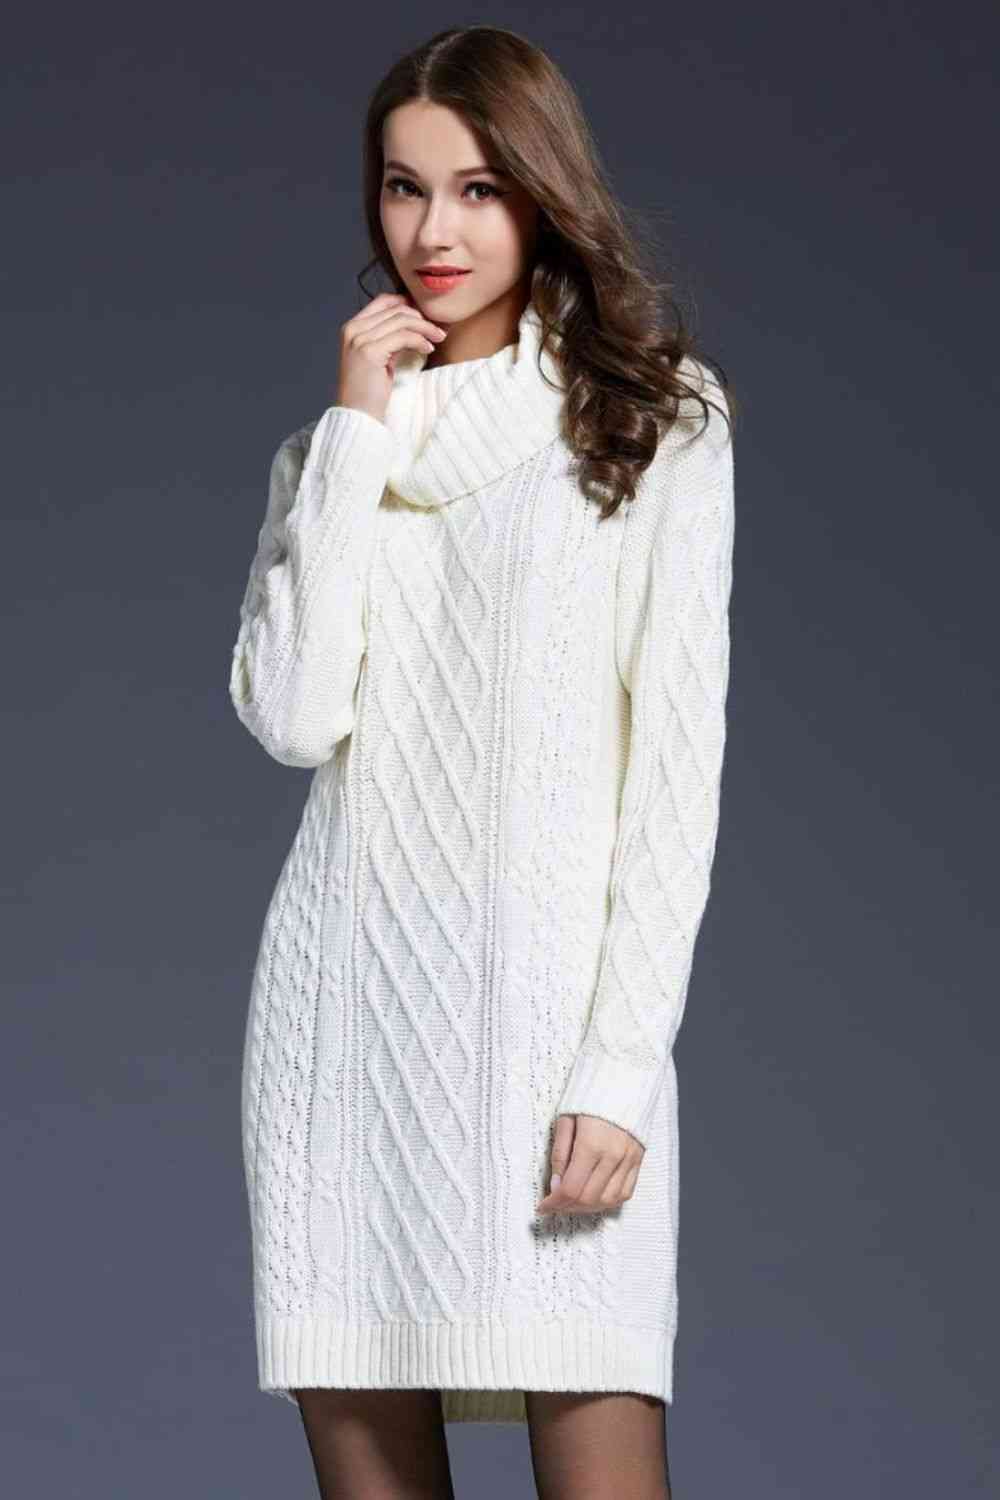 Woven Right Full Size Mixed Knit Cowl Neck Dropped Shoulder Sweater Dress White